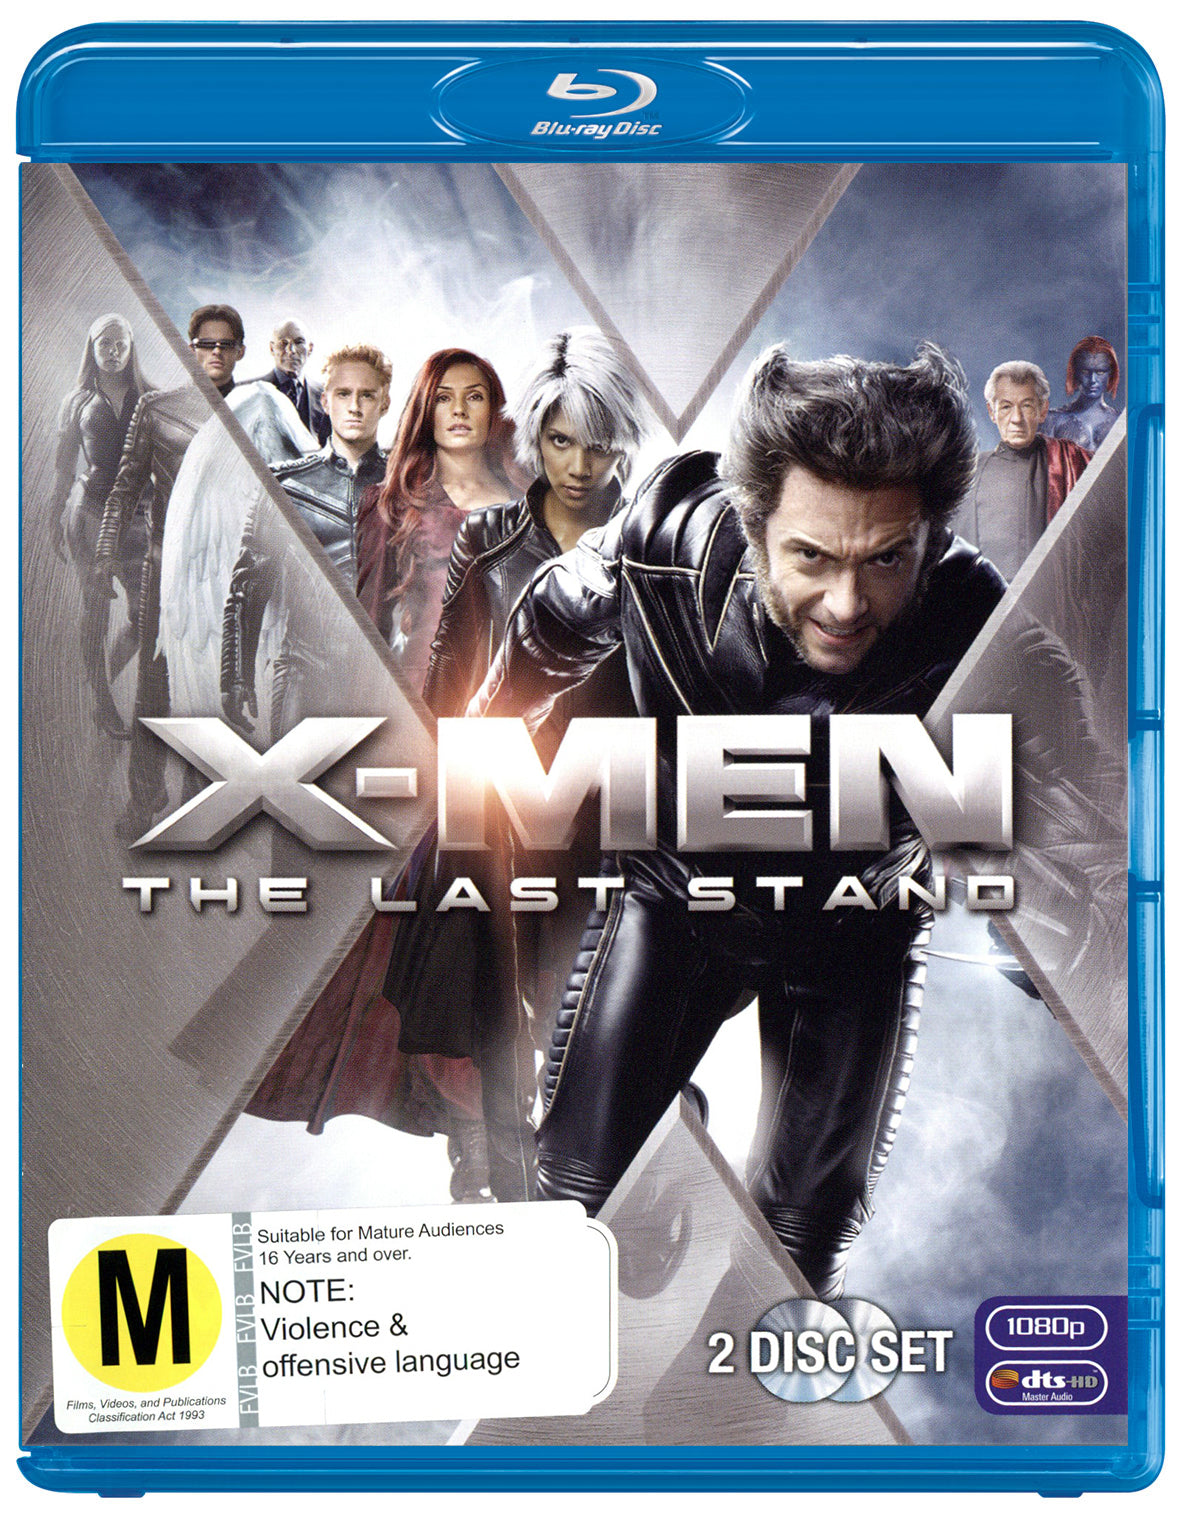 X-Men The Last Stand (Blu Ray)